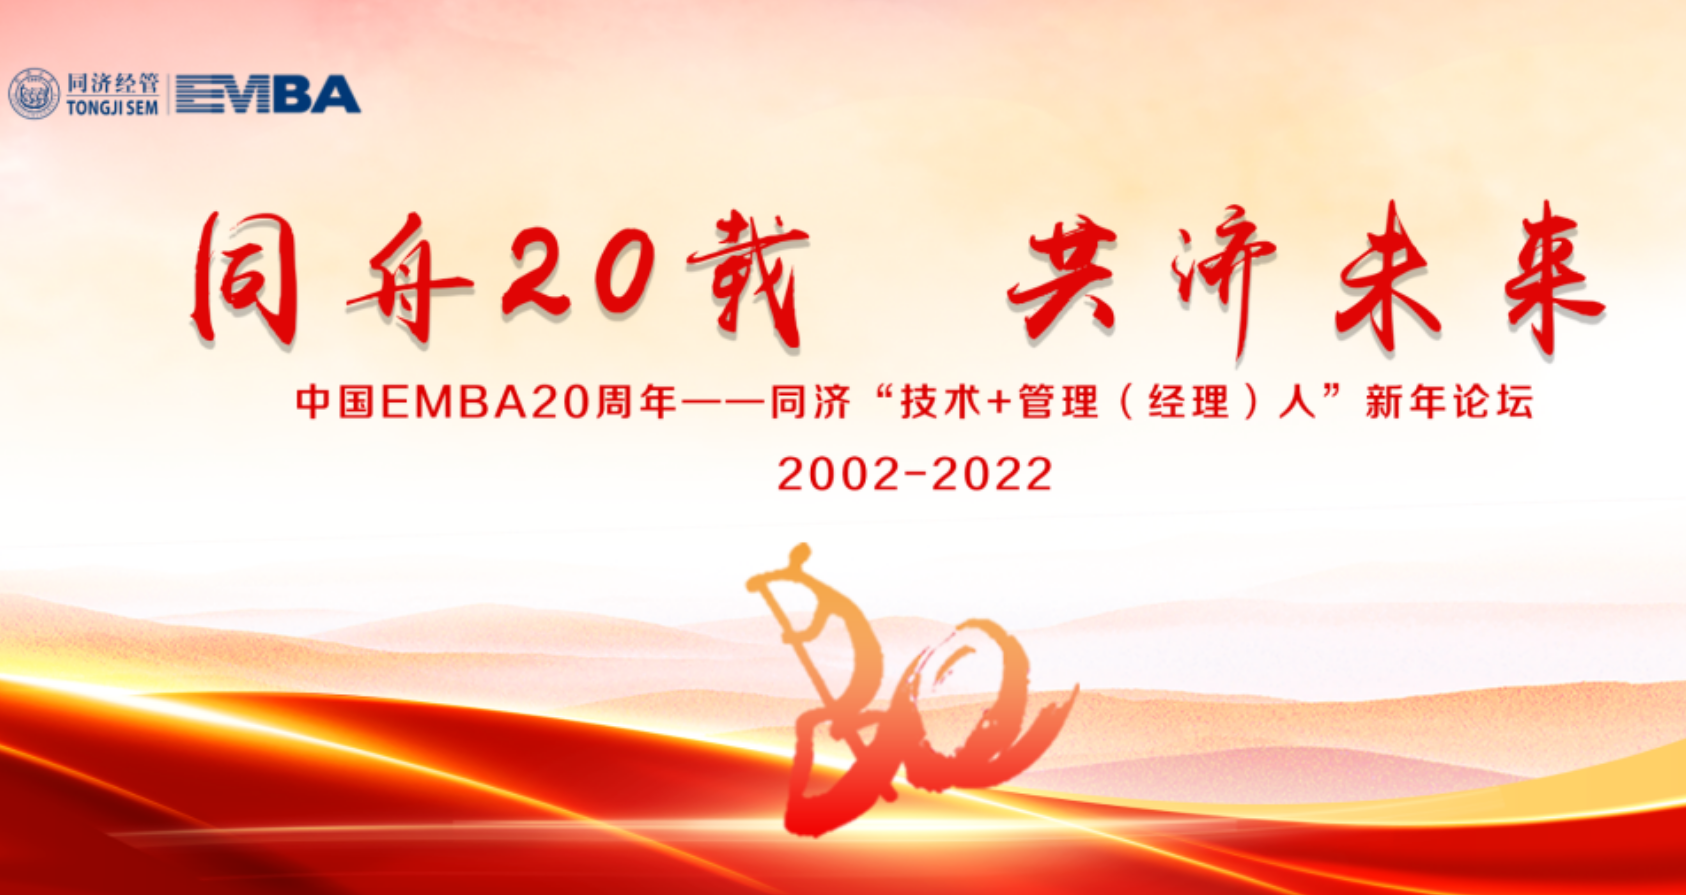 China EMBA 20th Anniversary and Tongji “Technical + Management Personnel” New Year Forum Are Successfully Held